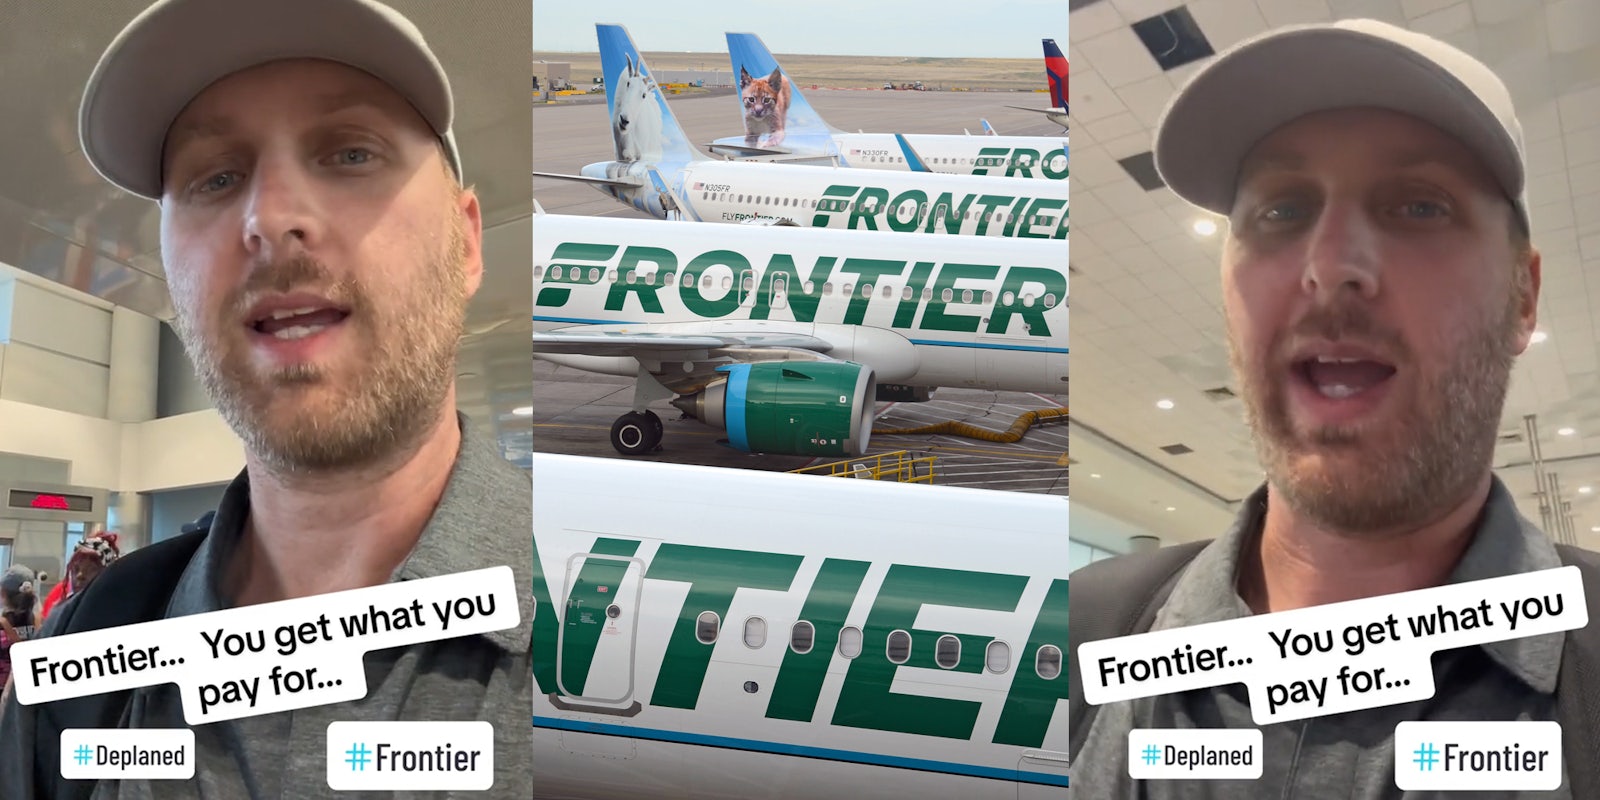 Frontier Airlines customer speaking with caption 'Frontier...You get what you pay for... #Deplaned #Frontier' (l) Frontier Airlines planes lined up (c) Frontier Airlines customer speaking with caption 'Frontier...You get what you pay for... #Deplaned #Frontier' (r)